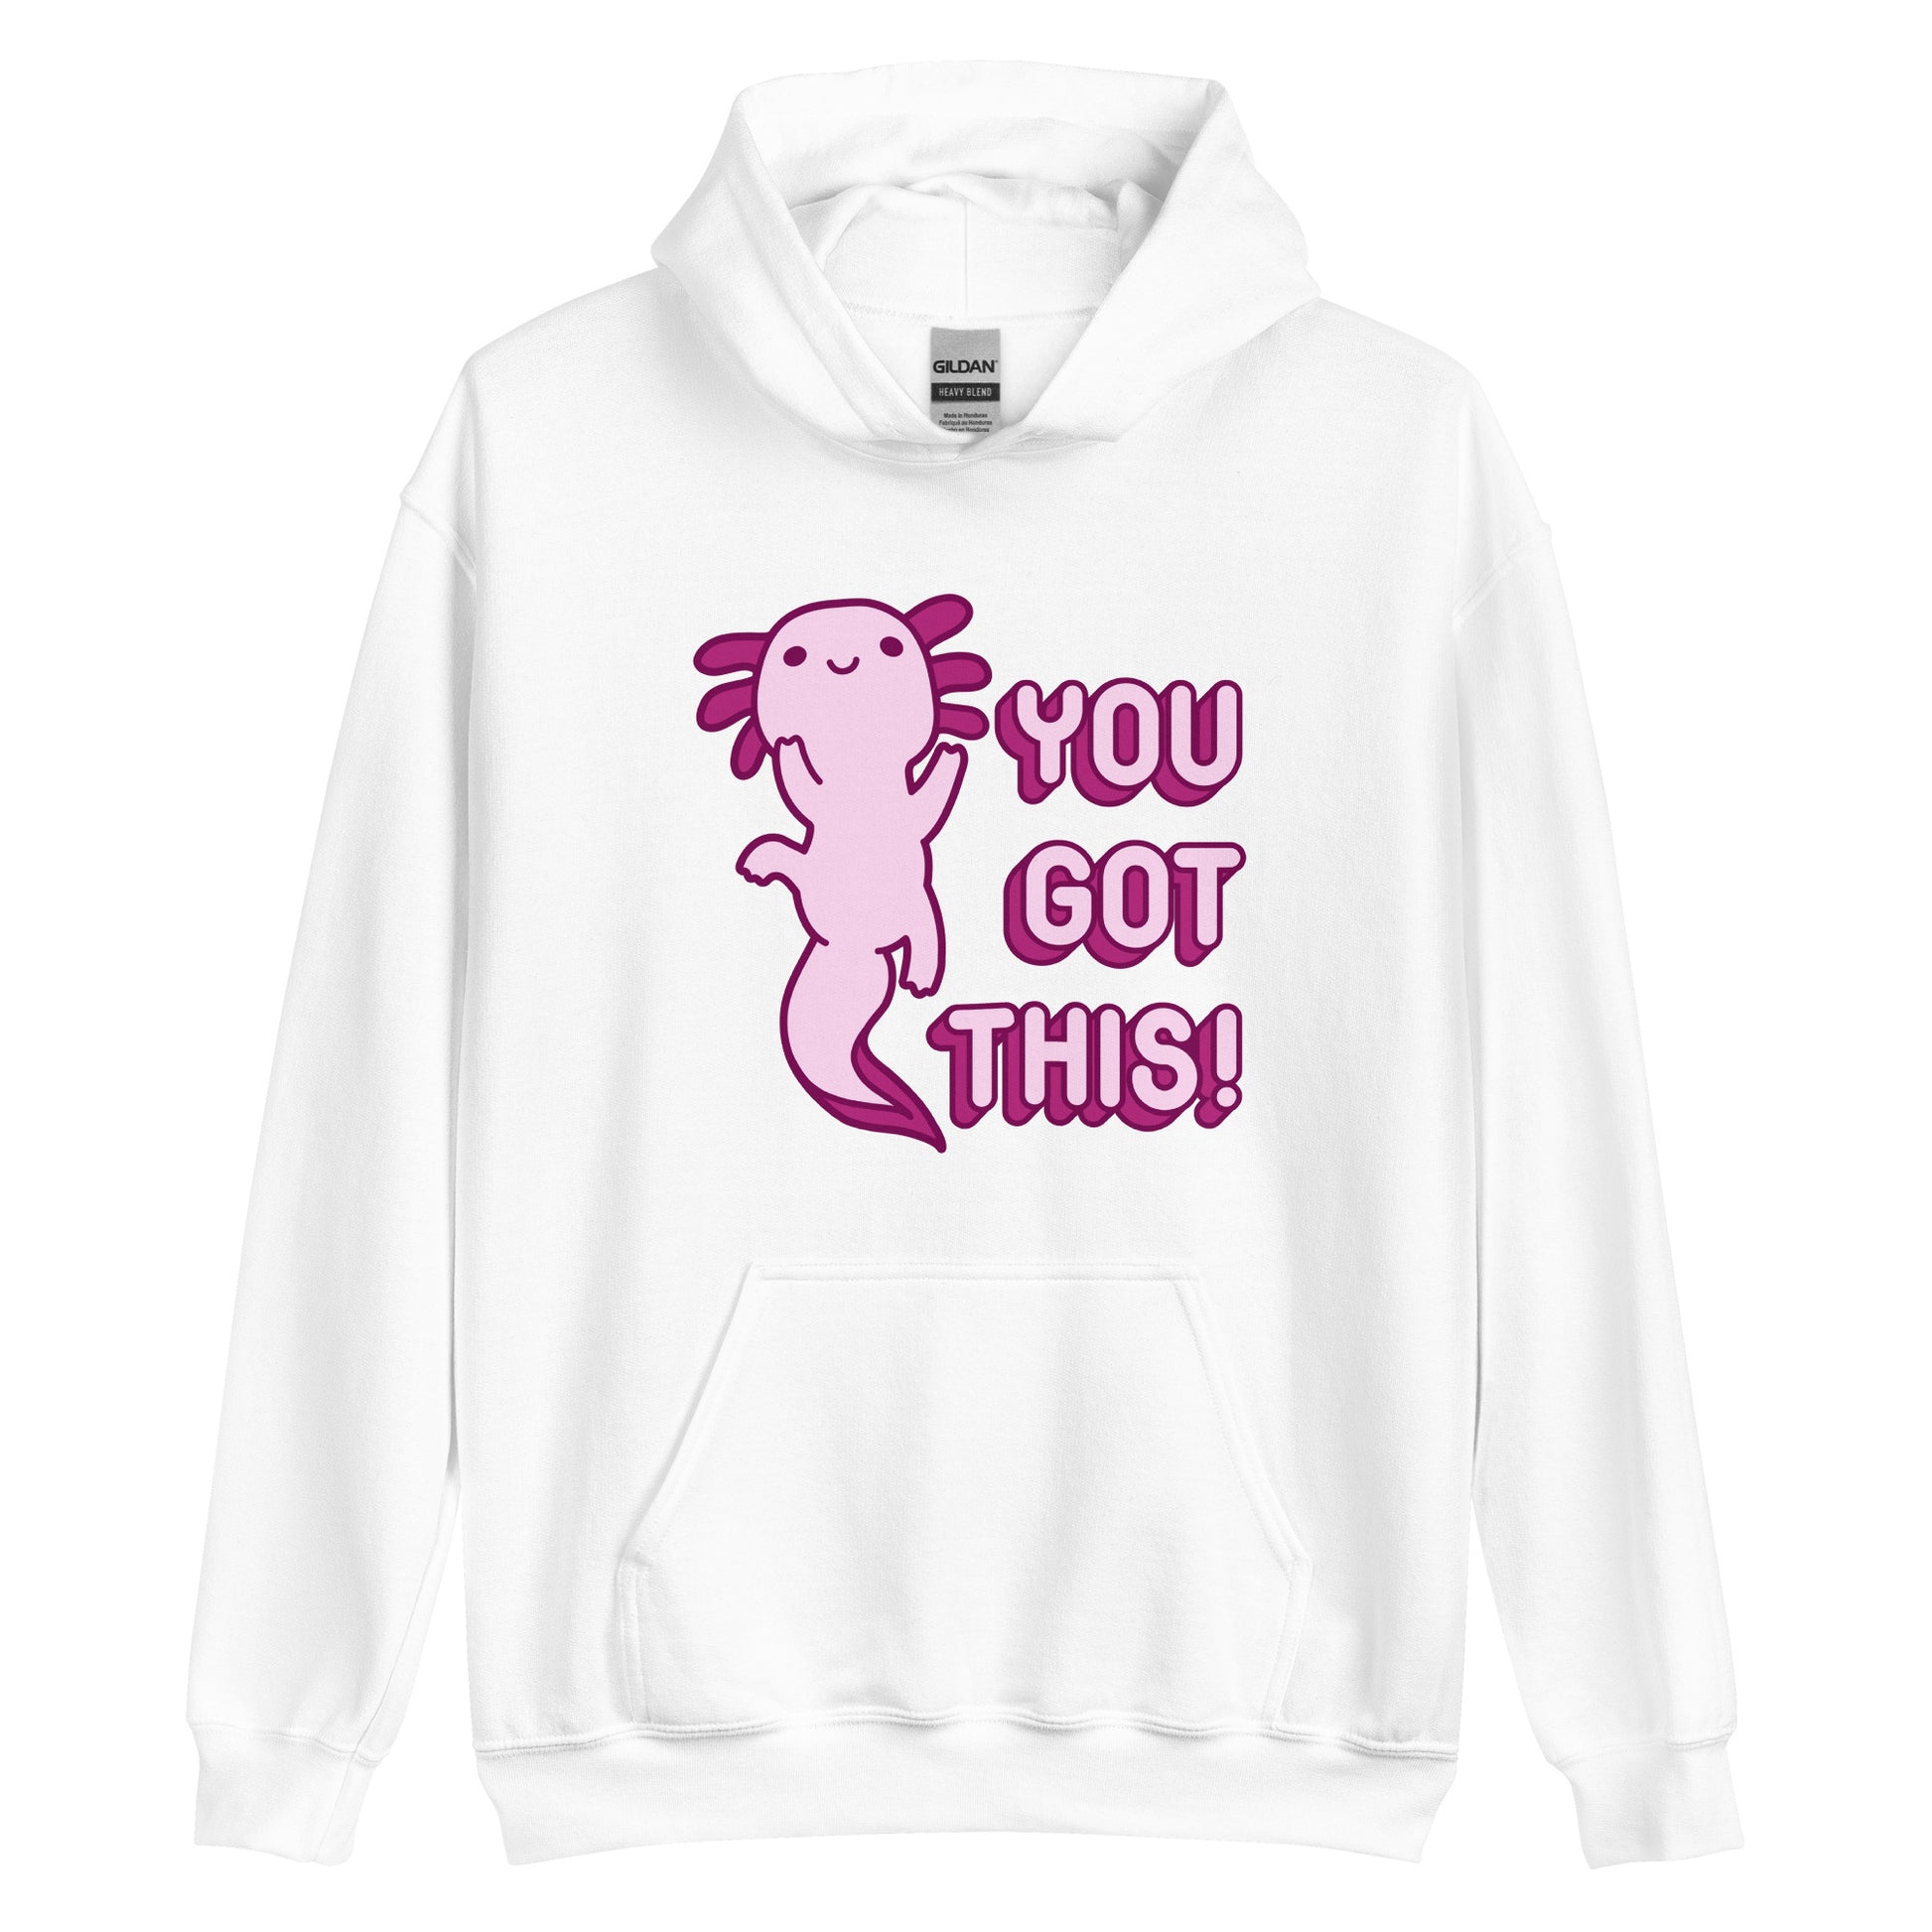 A white hooded sweatshirt with front pouch pocket featuring a picture of a pink axolotl and text reading "You Got This!" in pink bubble letters